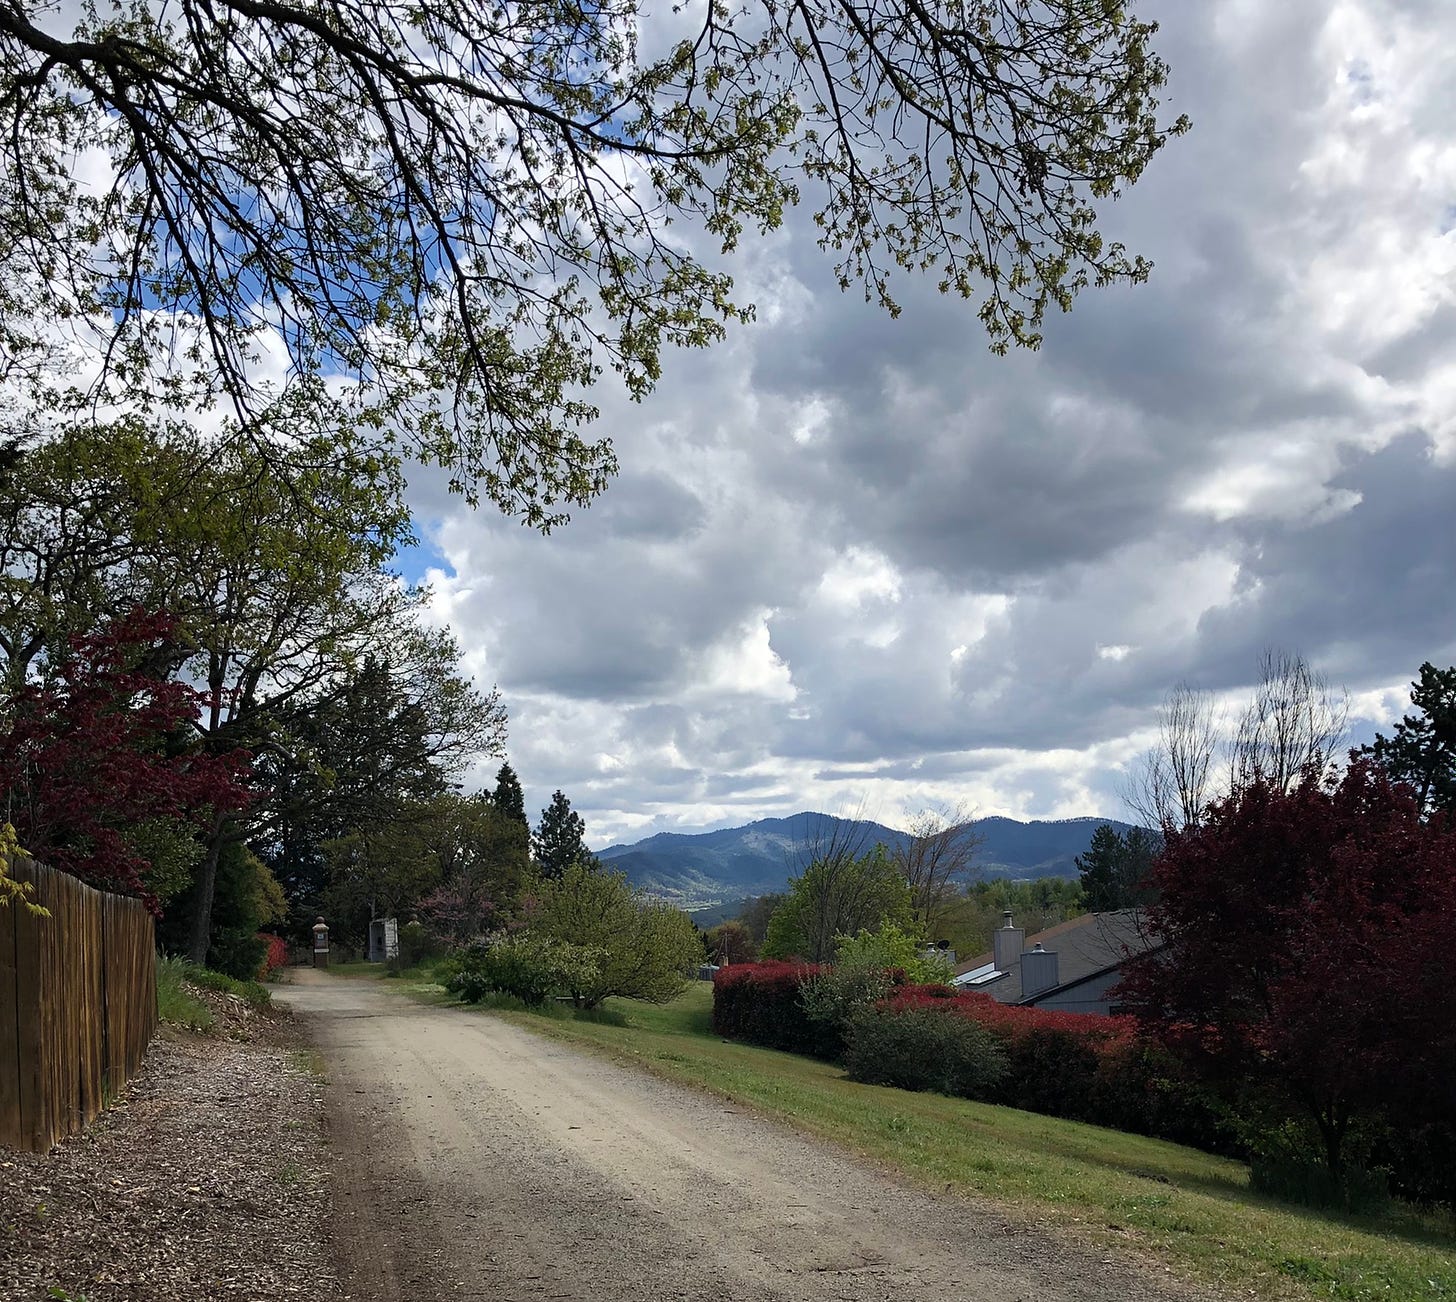 a dirt road leading to a distant gate with lots of trees and a view of mountains with a dramatically cloudy sky